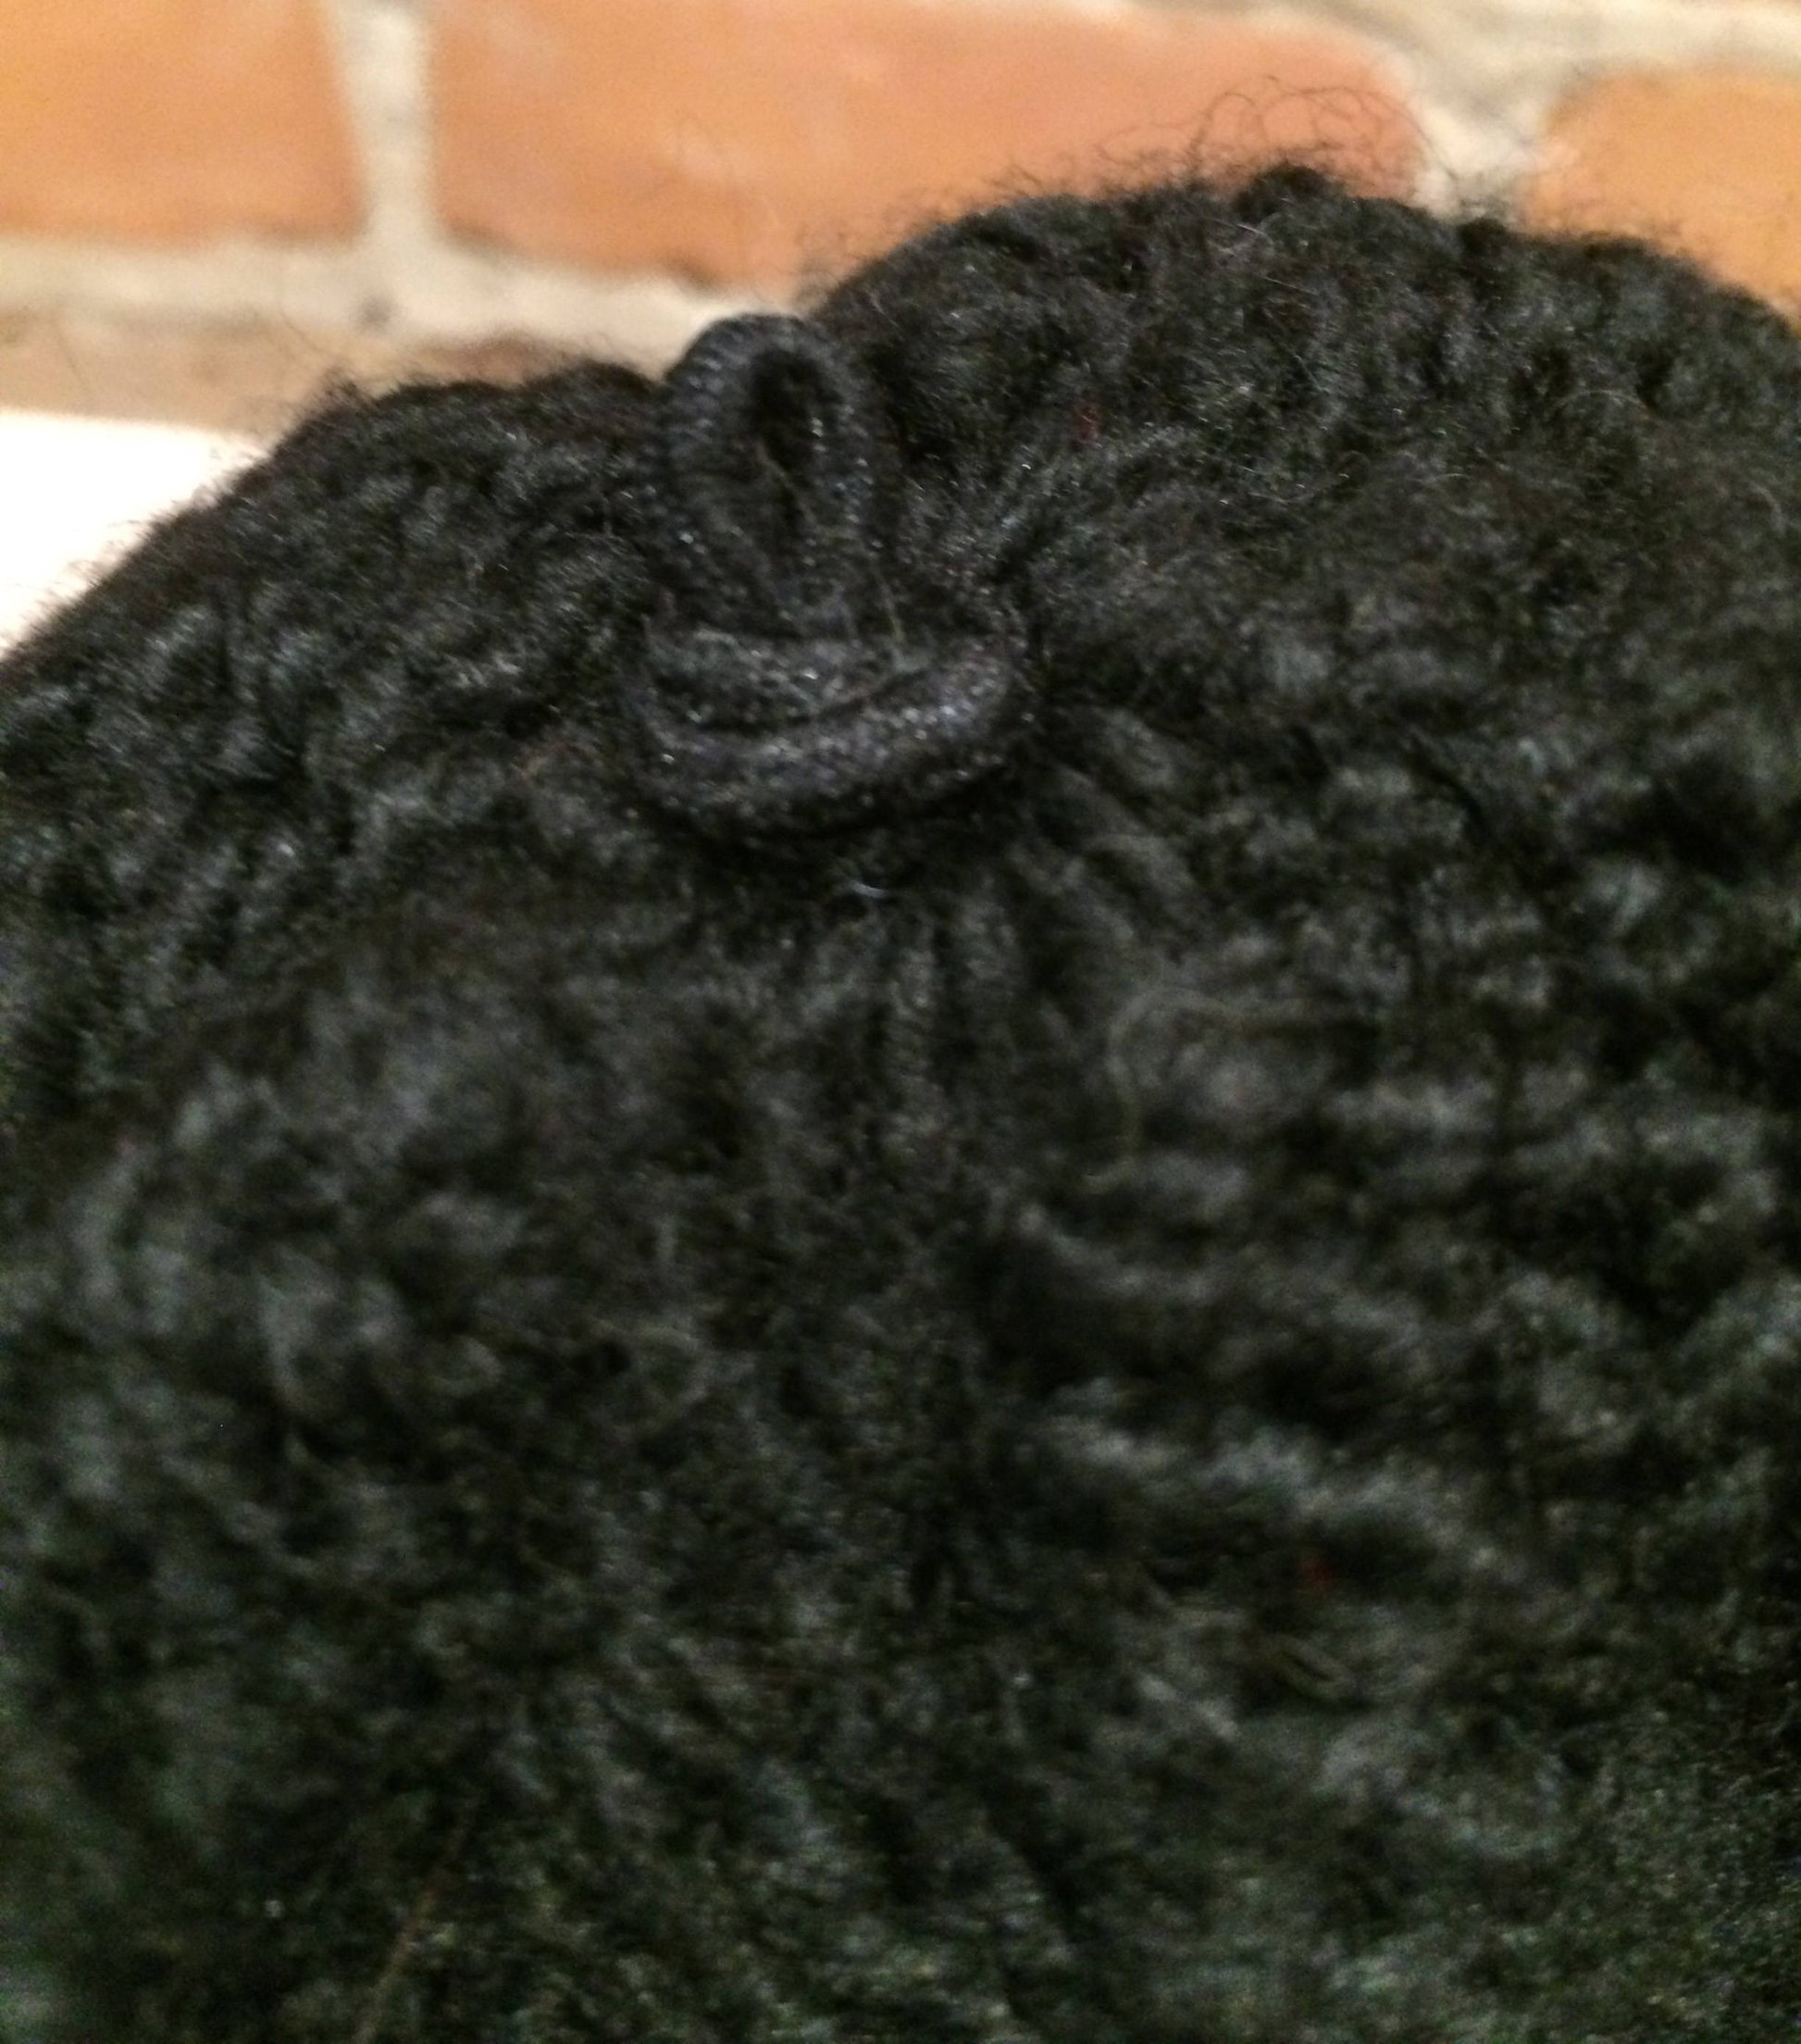 View of Elastic Loop Attachment Knot Inside Winter Knit Hat